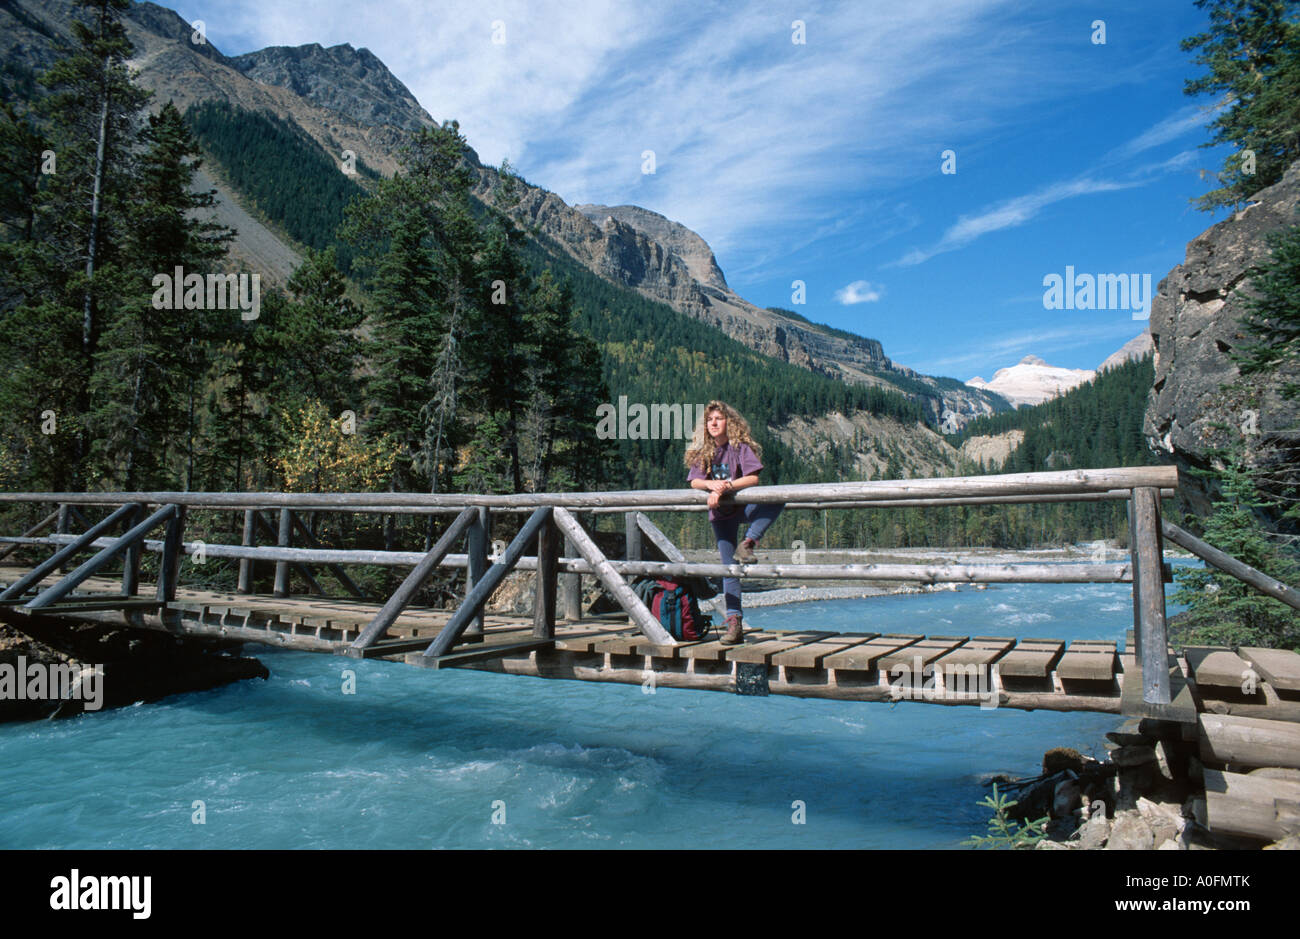 woman standing on a wooden bridge over river, Canada, Alberta, Banff NP Stock Photo